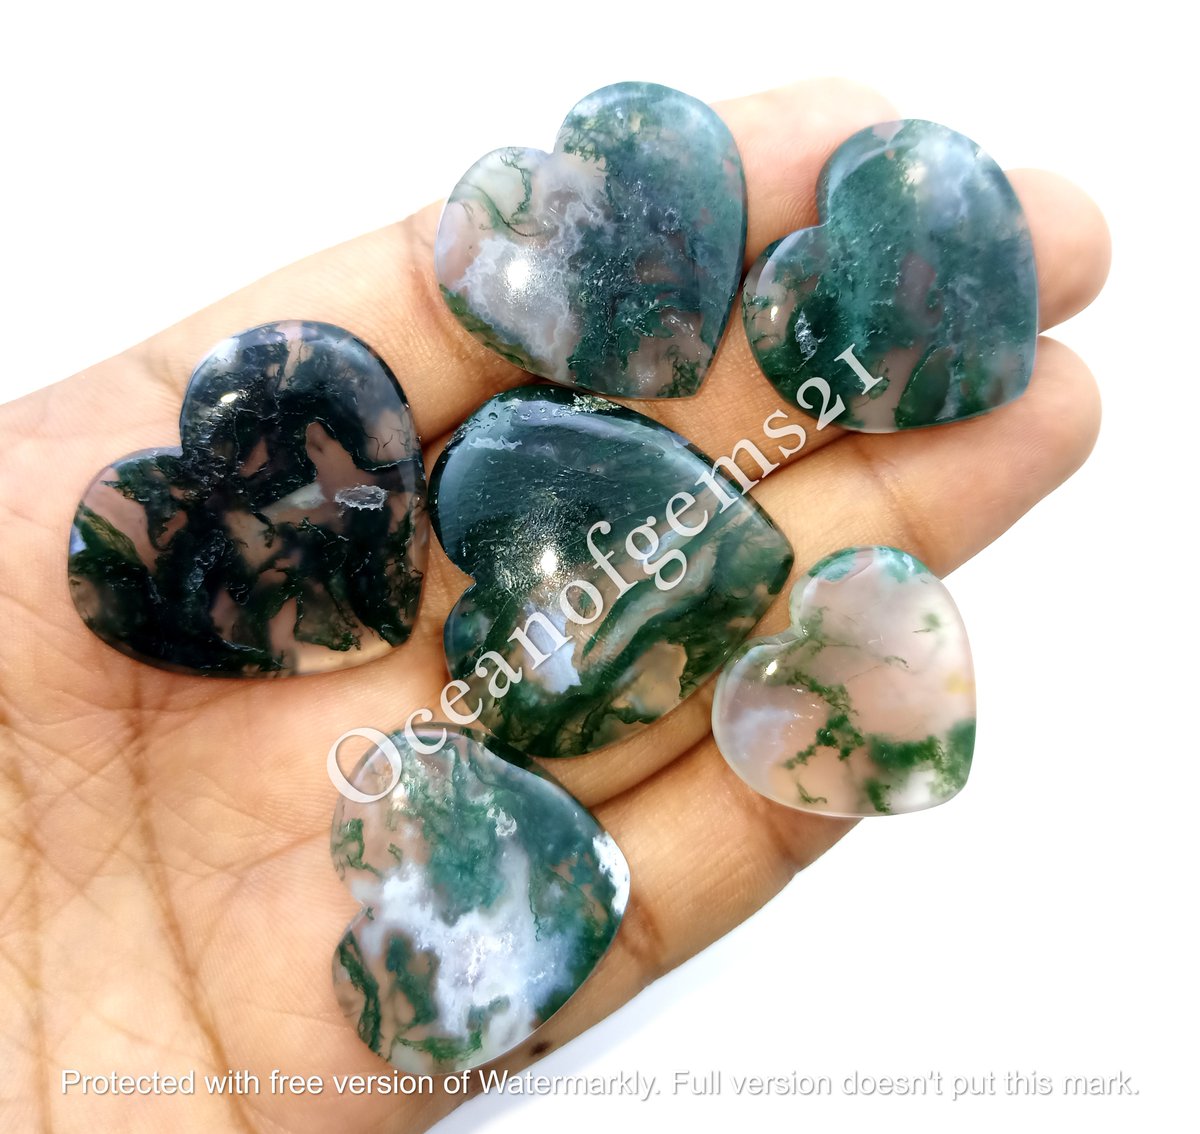 Natural Green Moss Agate Heart Shape Cabochon Gemstones Dm For Price Size 25 to 40mm Approx Free Drilling Service Worldwide Shipping$6 Combined Shipping Available #greenmossagate #greenmossagateheart #heart #heartstone #mossagatejewelry #agate #agatestone